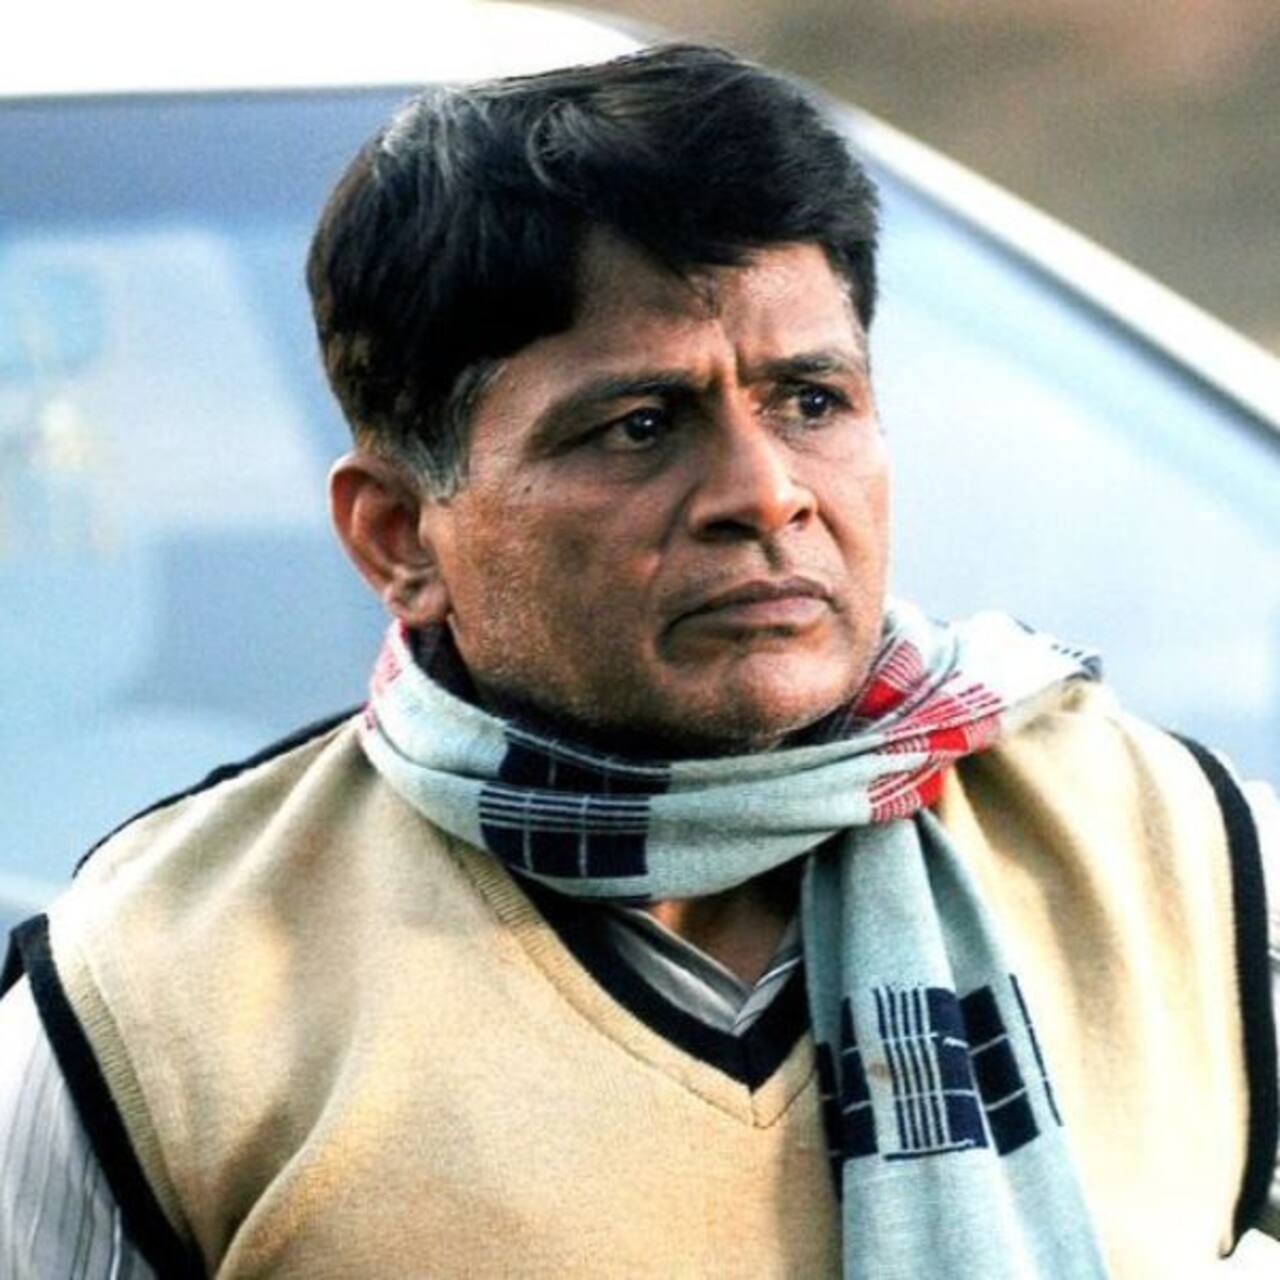 Peepli Live actor Raghubir Yadav’s wife files for divorce after 32 years of marriage, accuses him of cheating